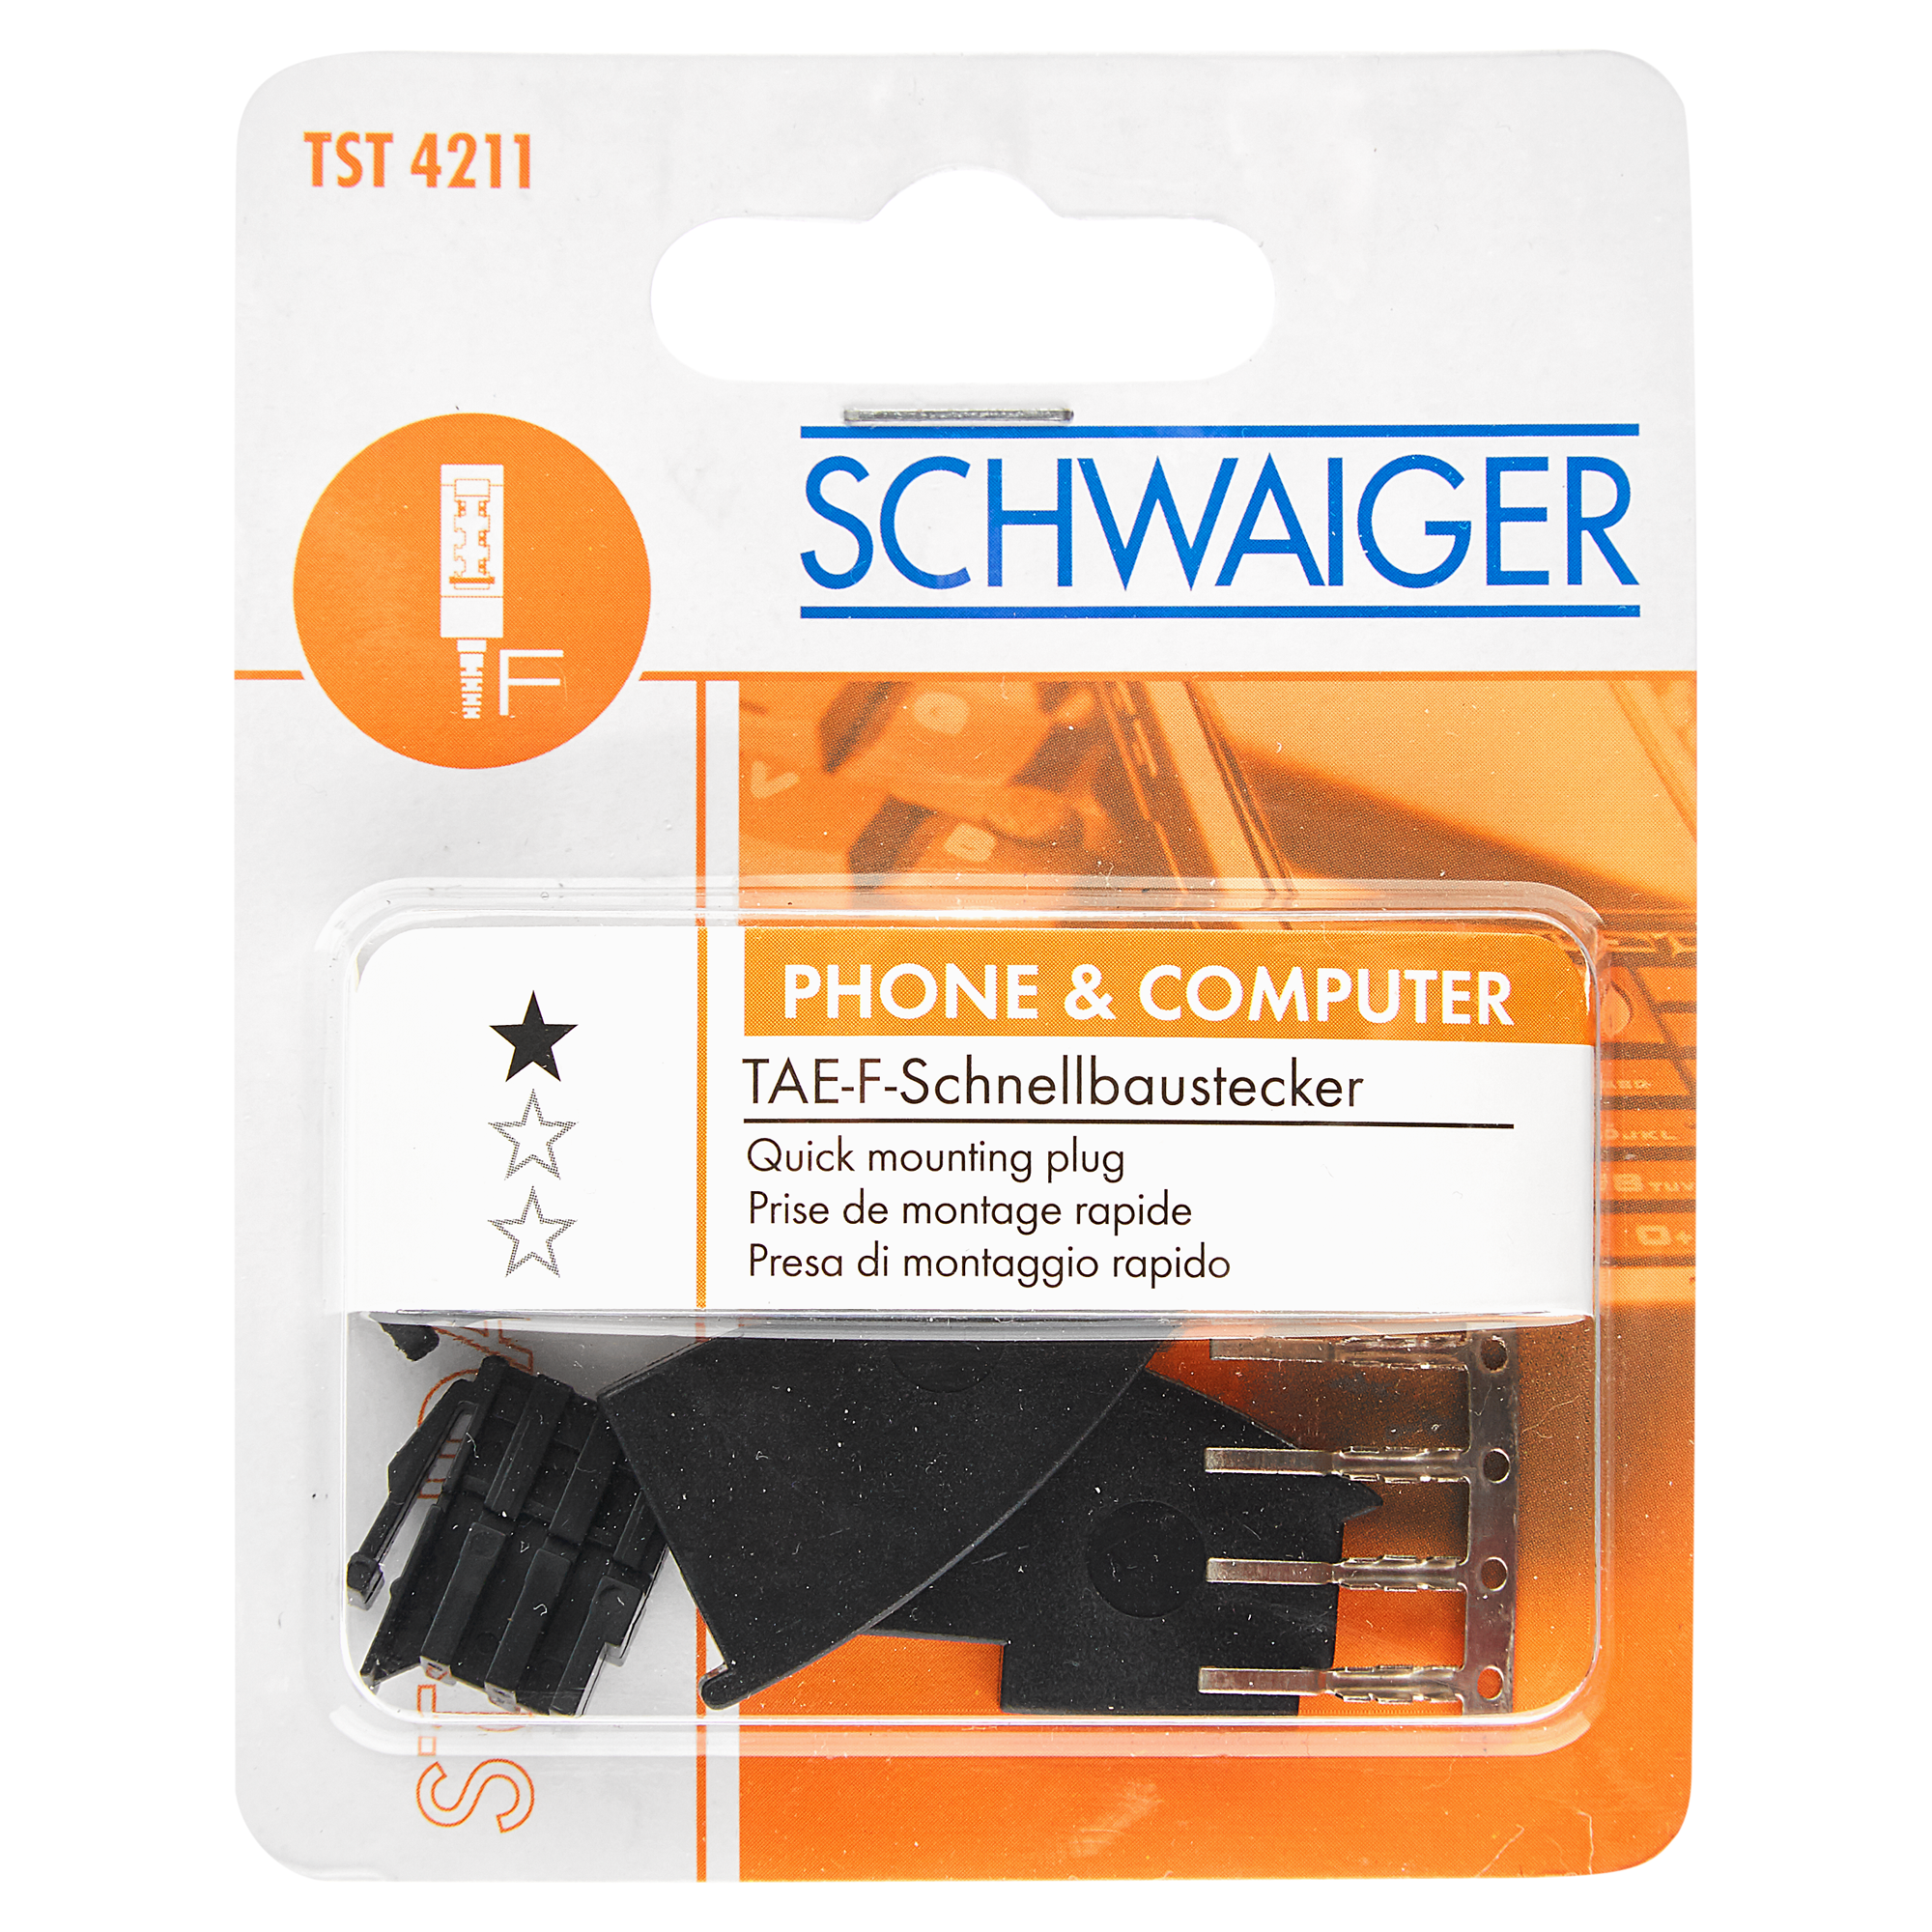 TAE-F-Schnellbaustecker "Phone & Computer" Standard + product picture